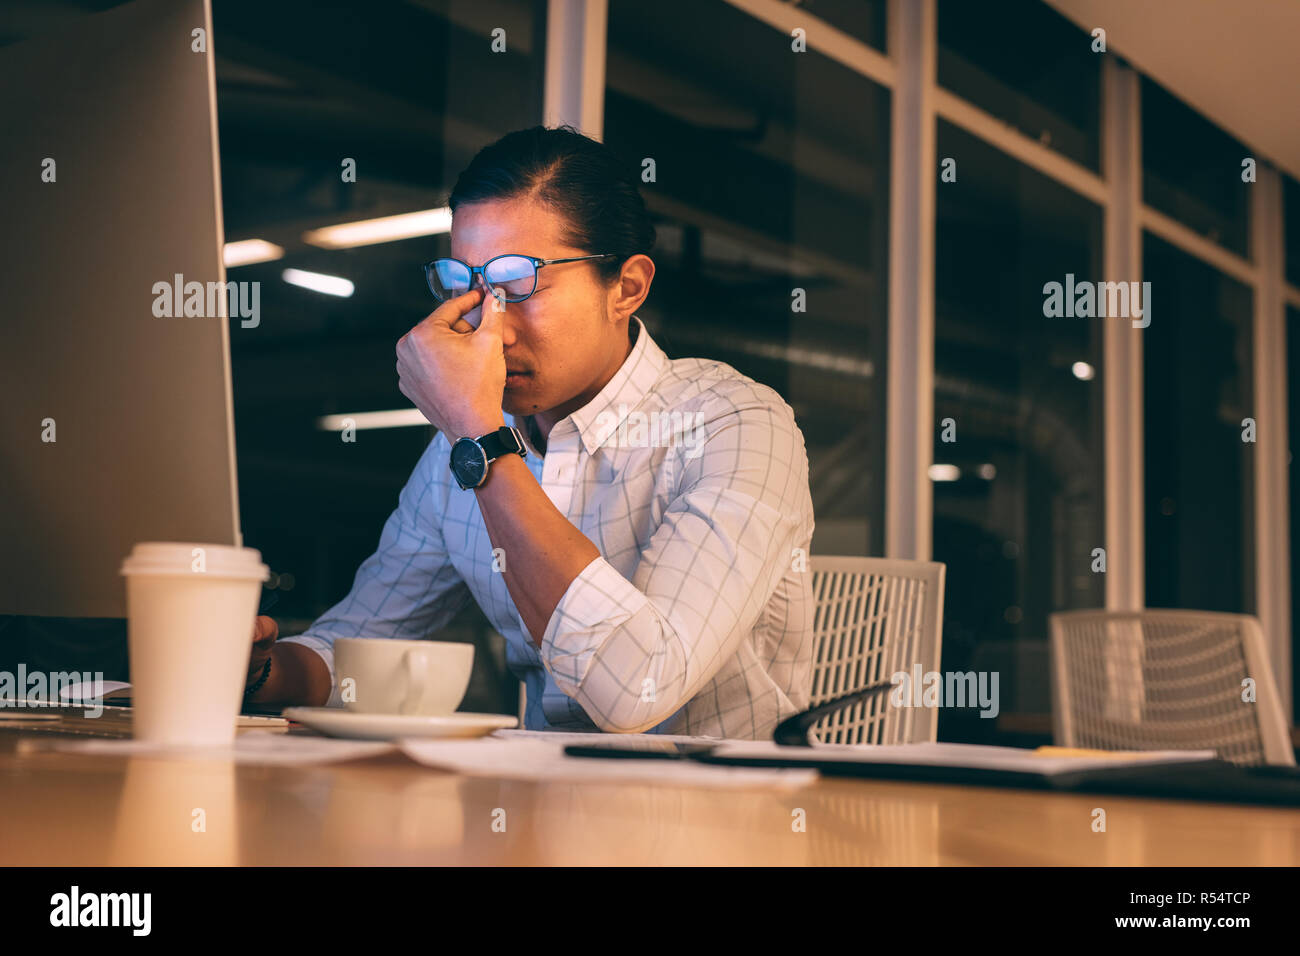 businessman looking tired working late night in office. Man sitting in front of computer working late looking stressed out. Stock Photo